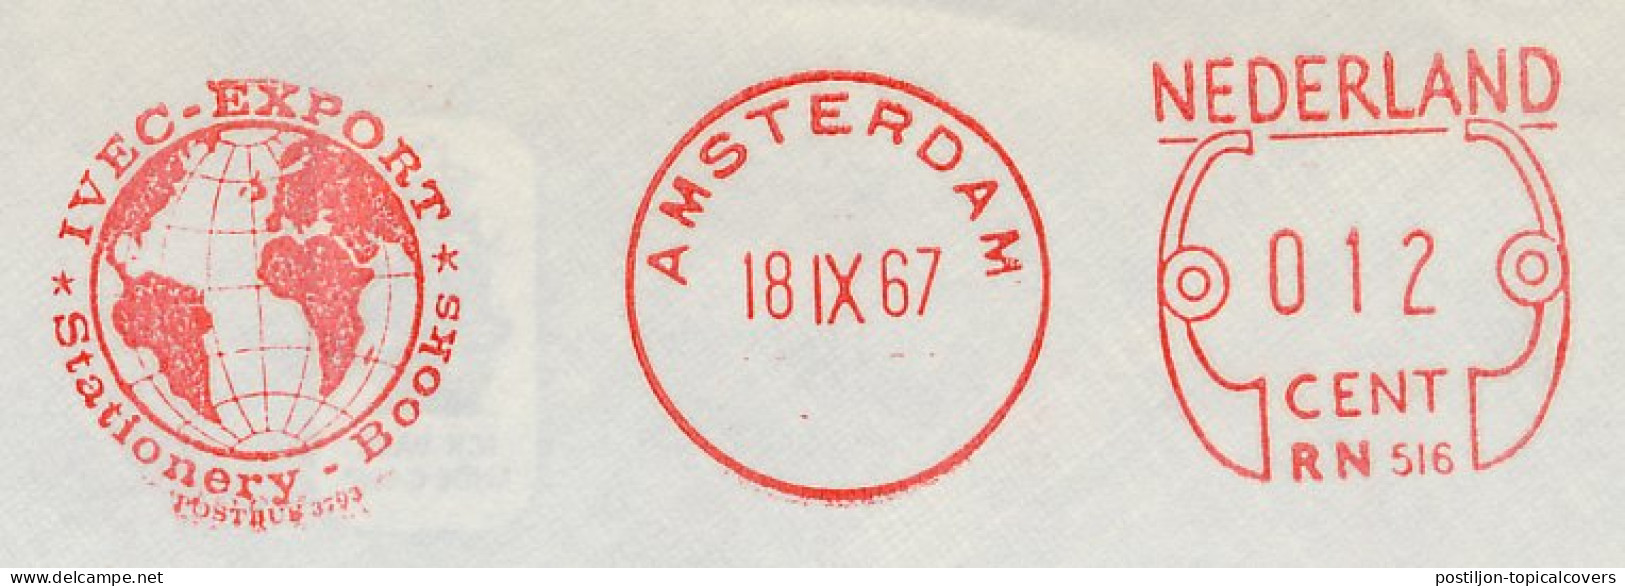 Meter Cover Netherlands 1967 - Neopost 516 Globe - Amsterdam  - Geographie